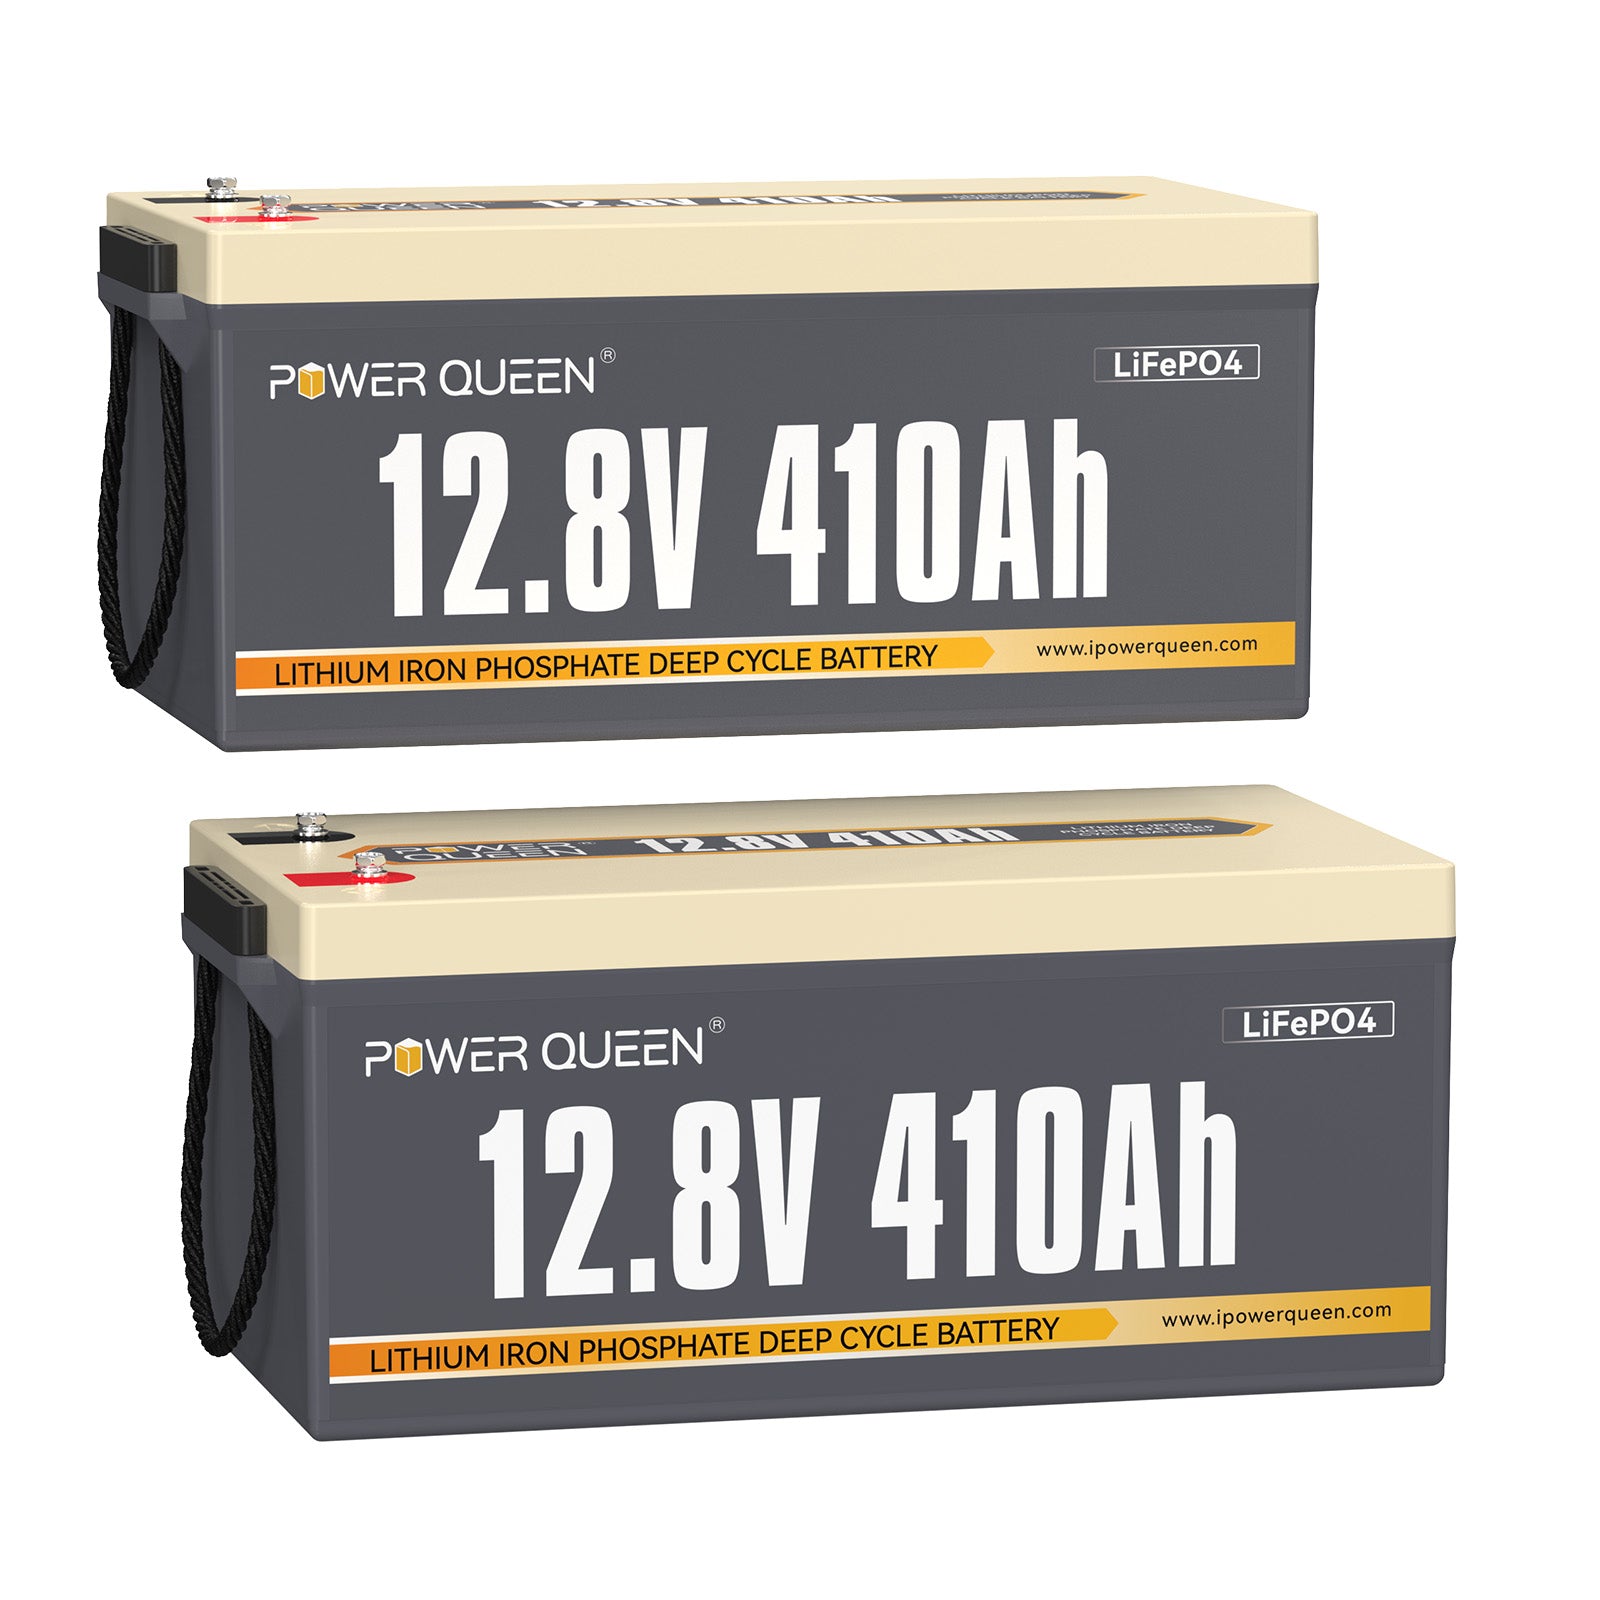 Power Queen 12V 410Ah LiFePO4 battery, built-in 250A BMS